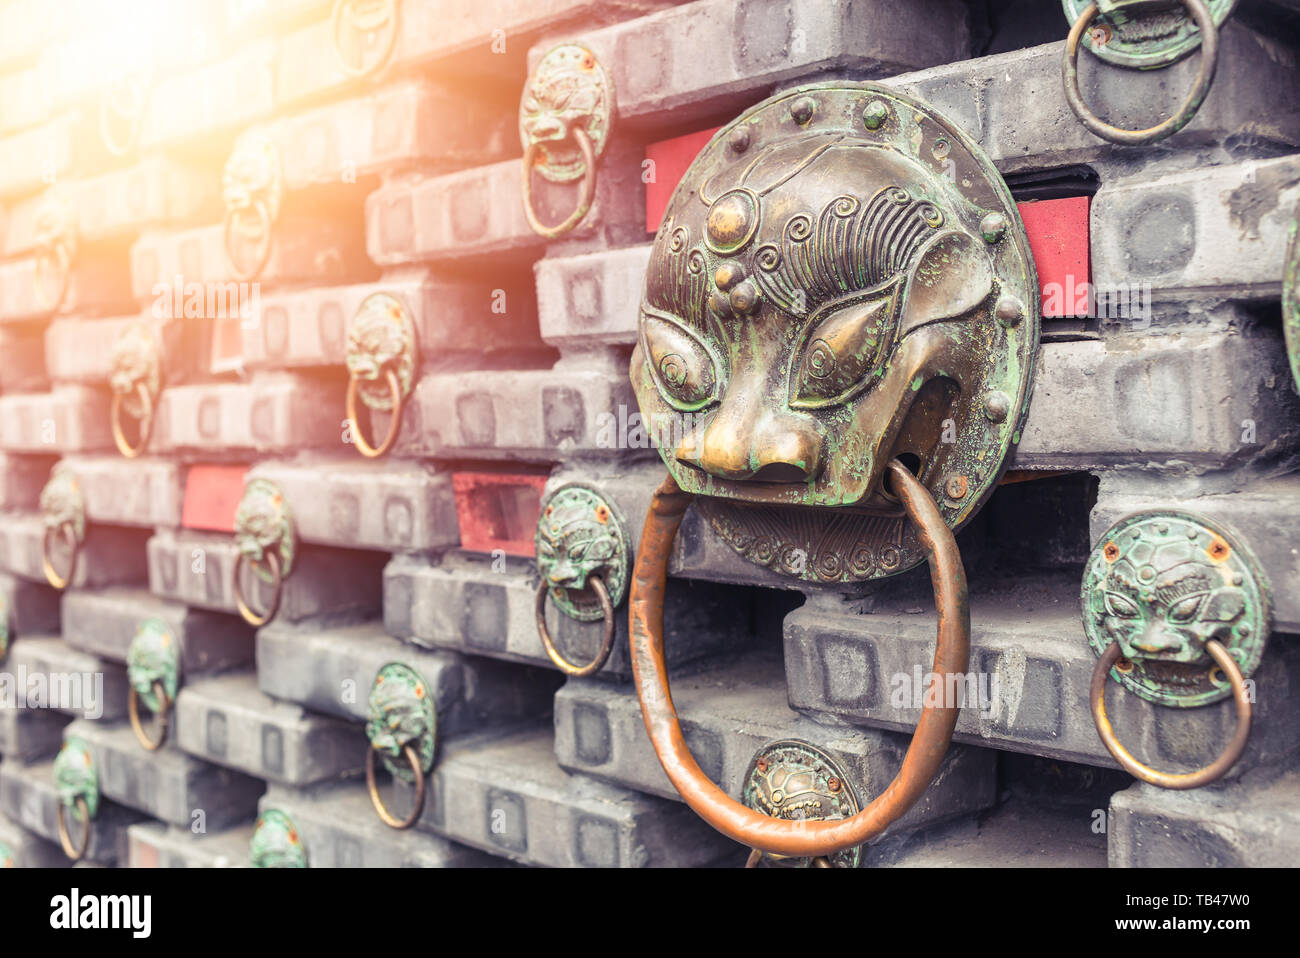 Ancient iron lions head door knocker situated on a brick wall . China . Stock Photo